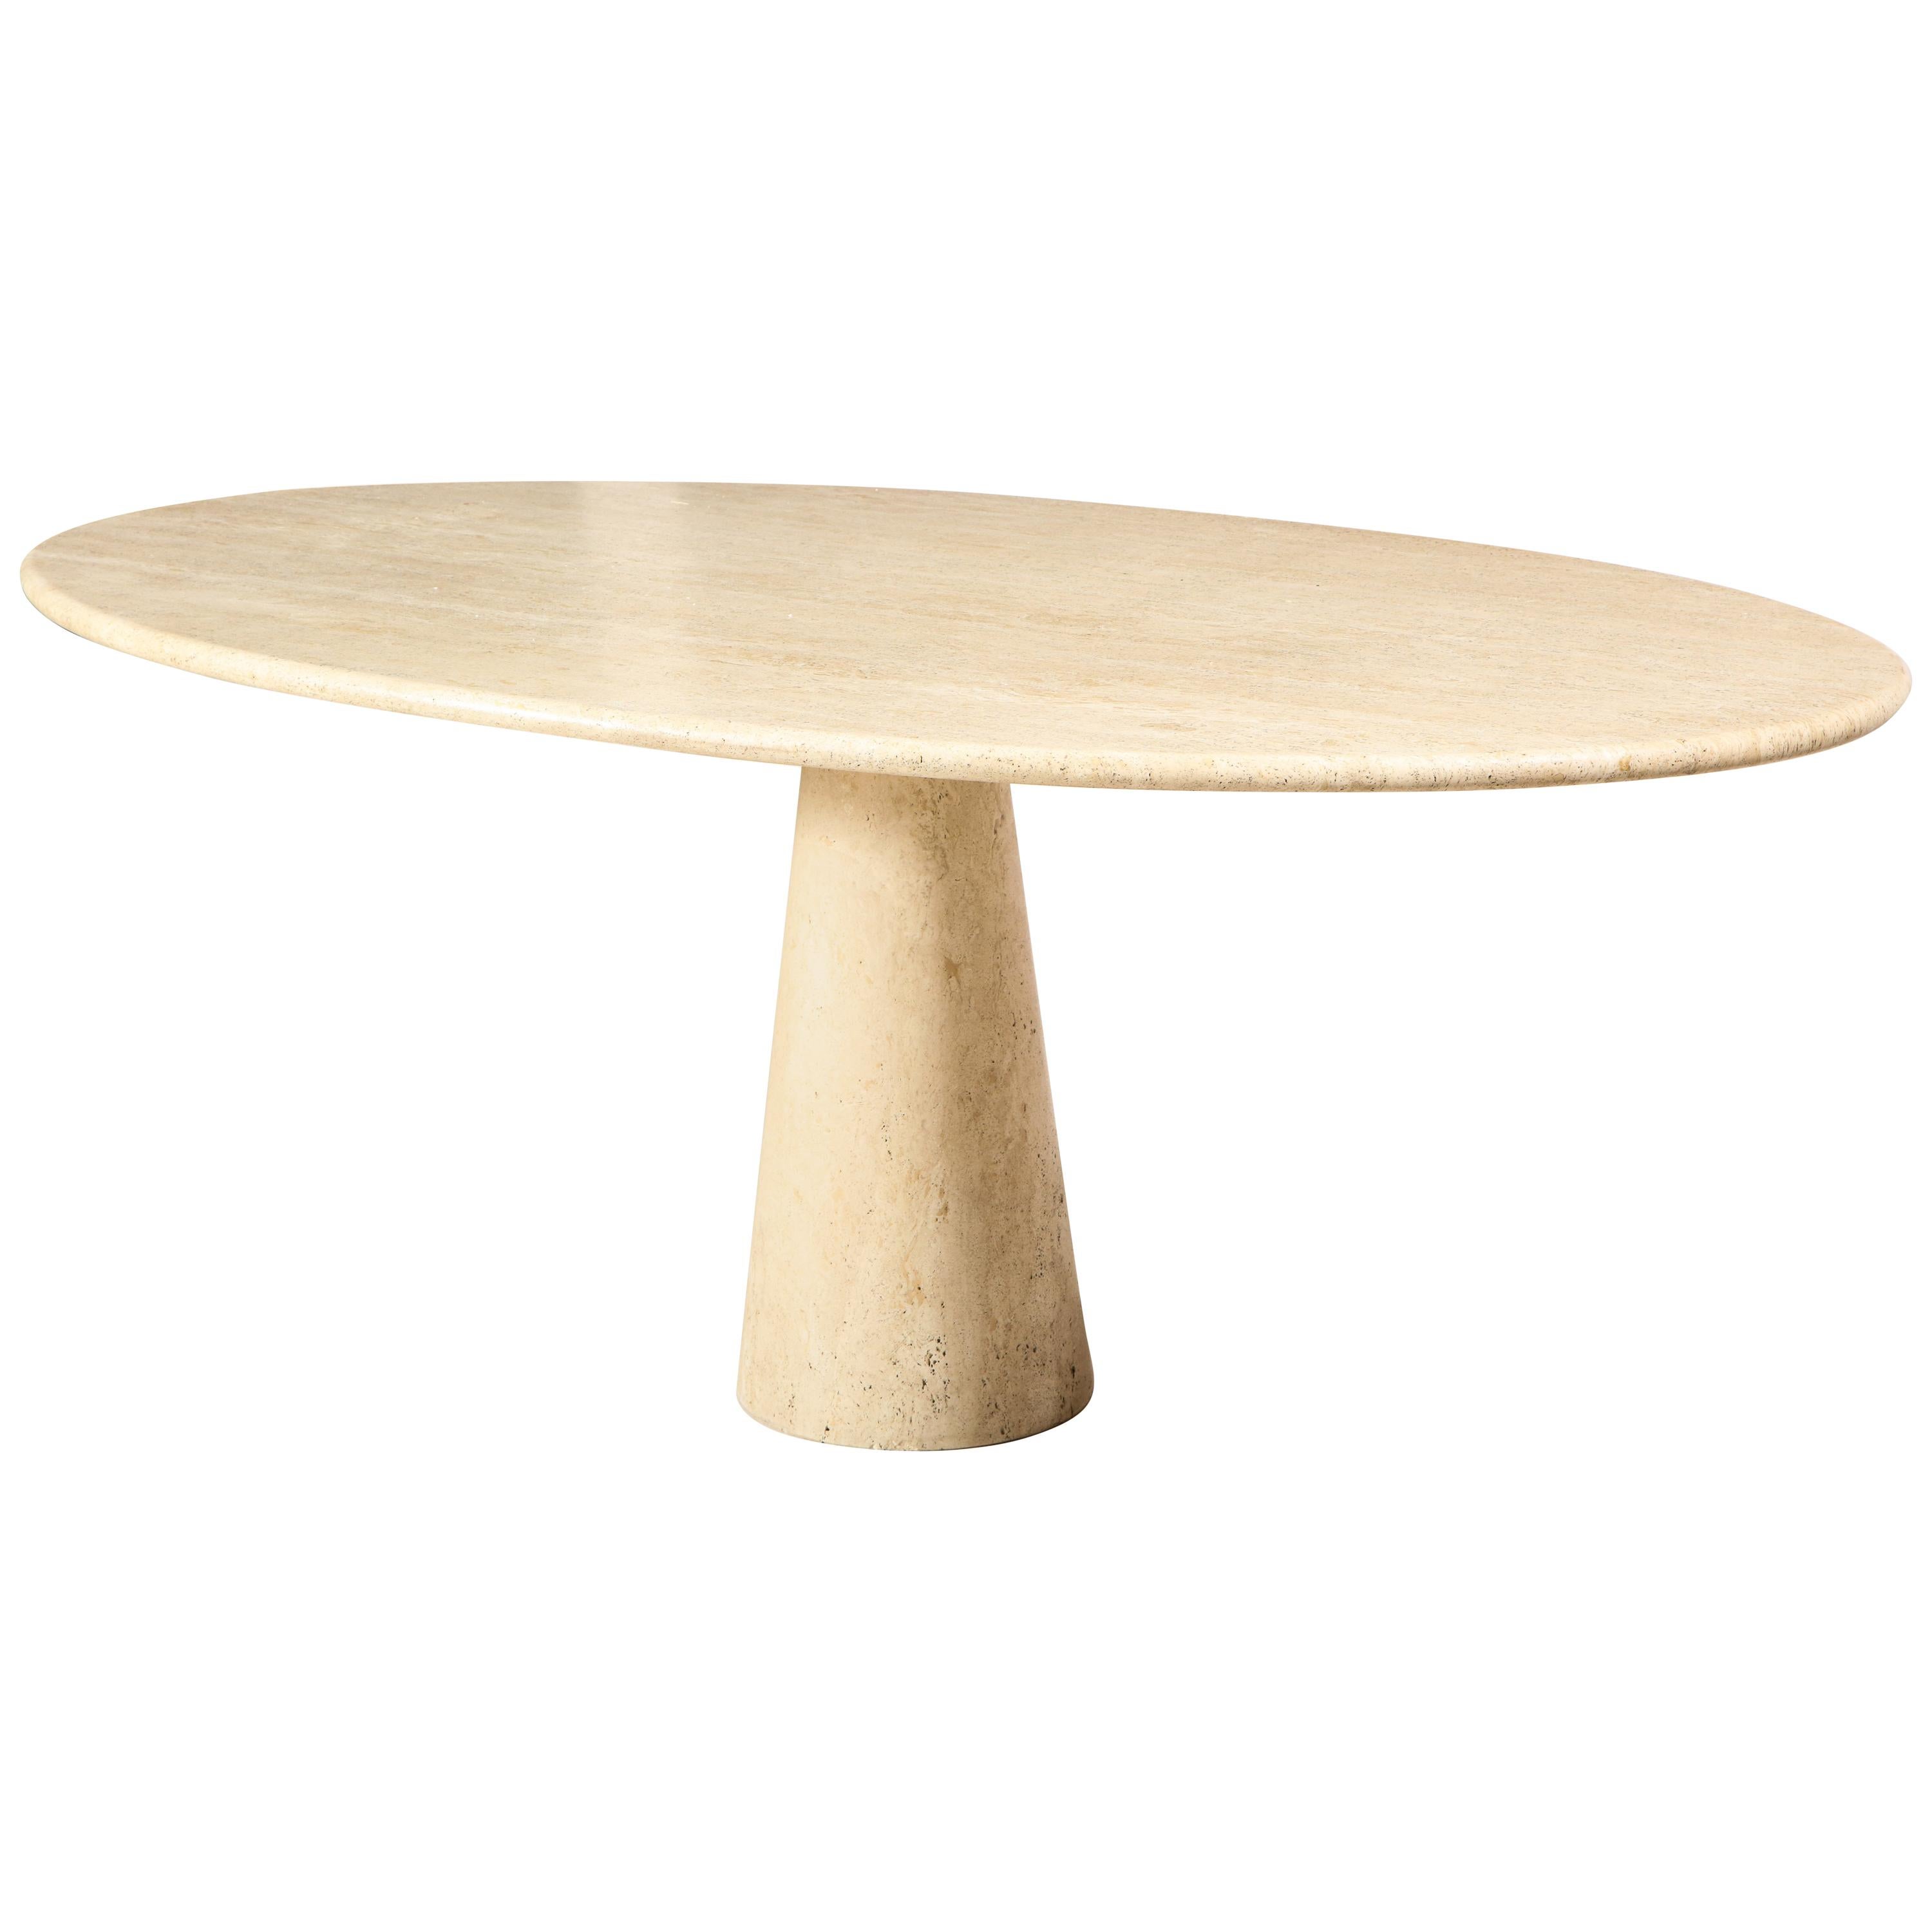 Angelo Mangiarotti Style Travertine Marble Oval Dining Table